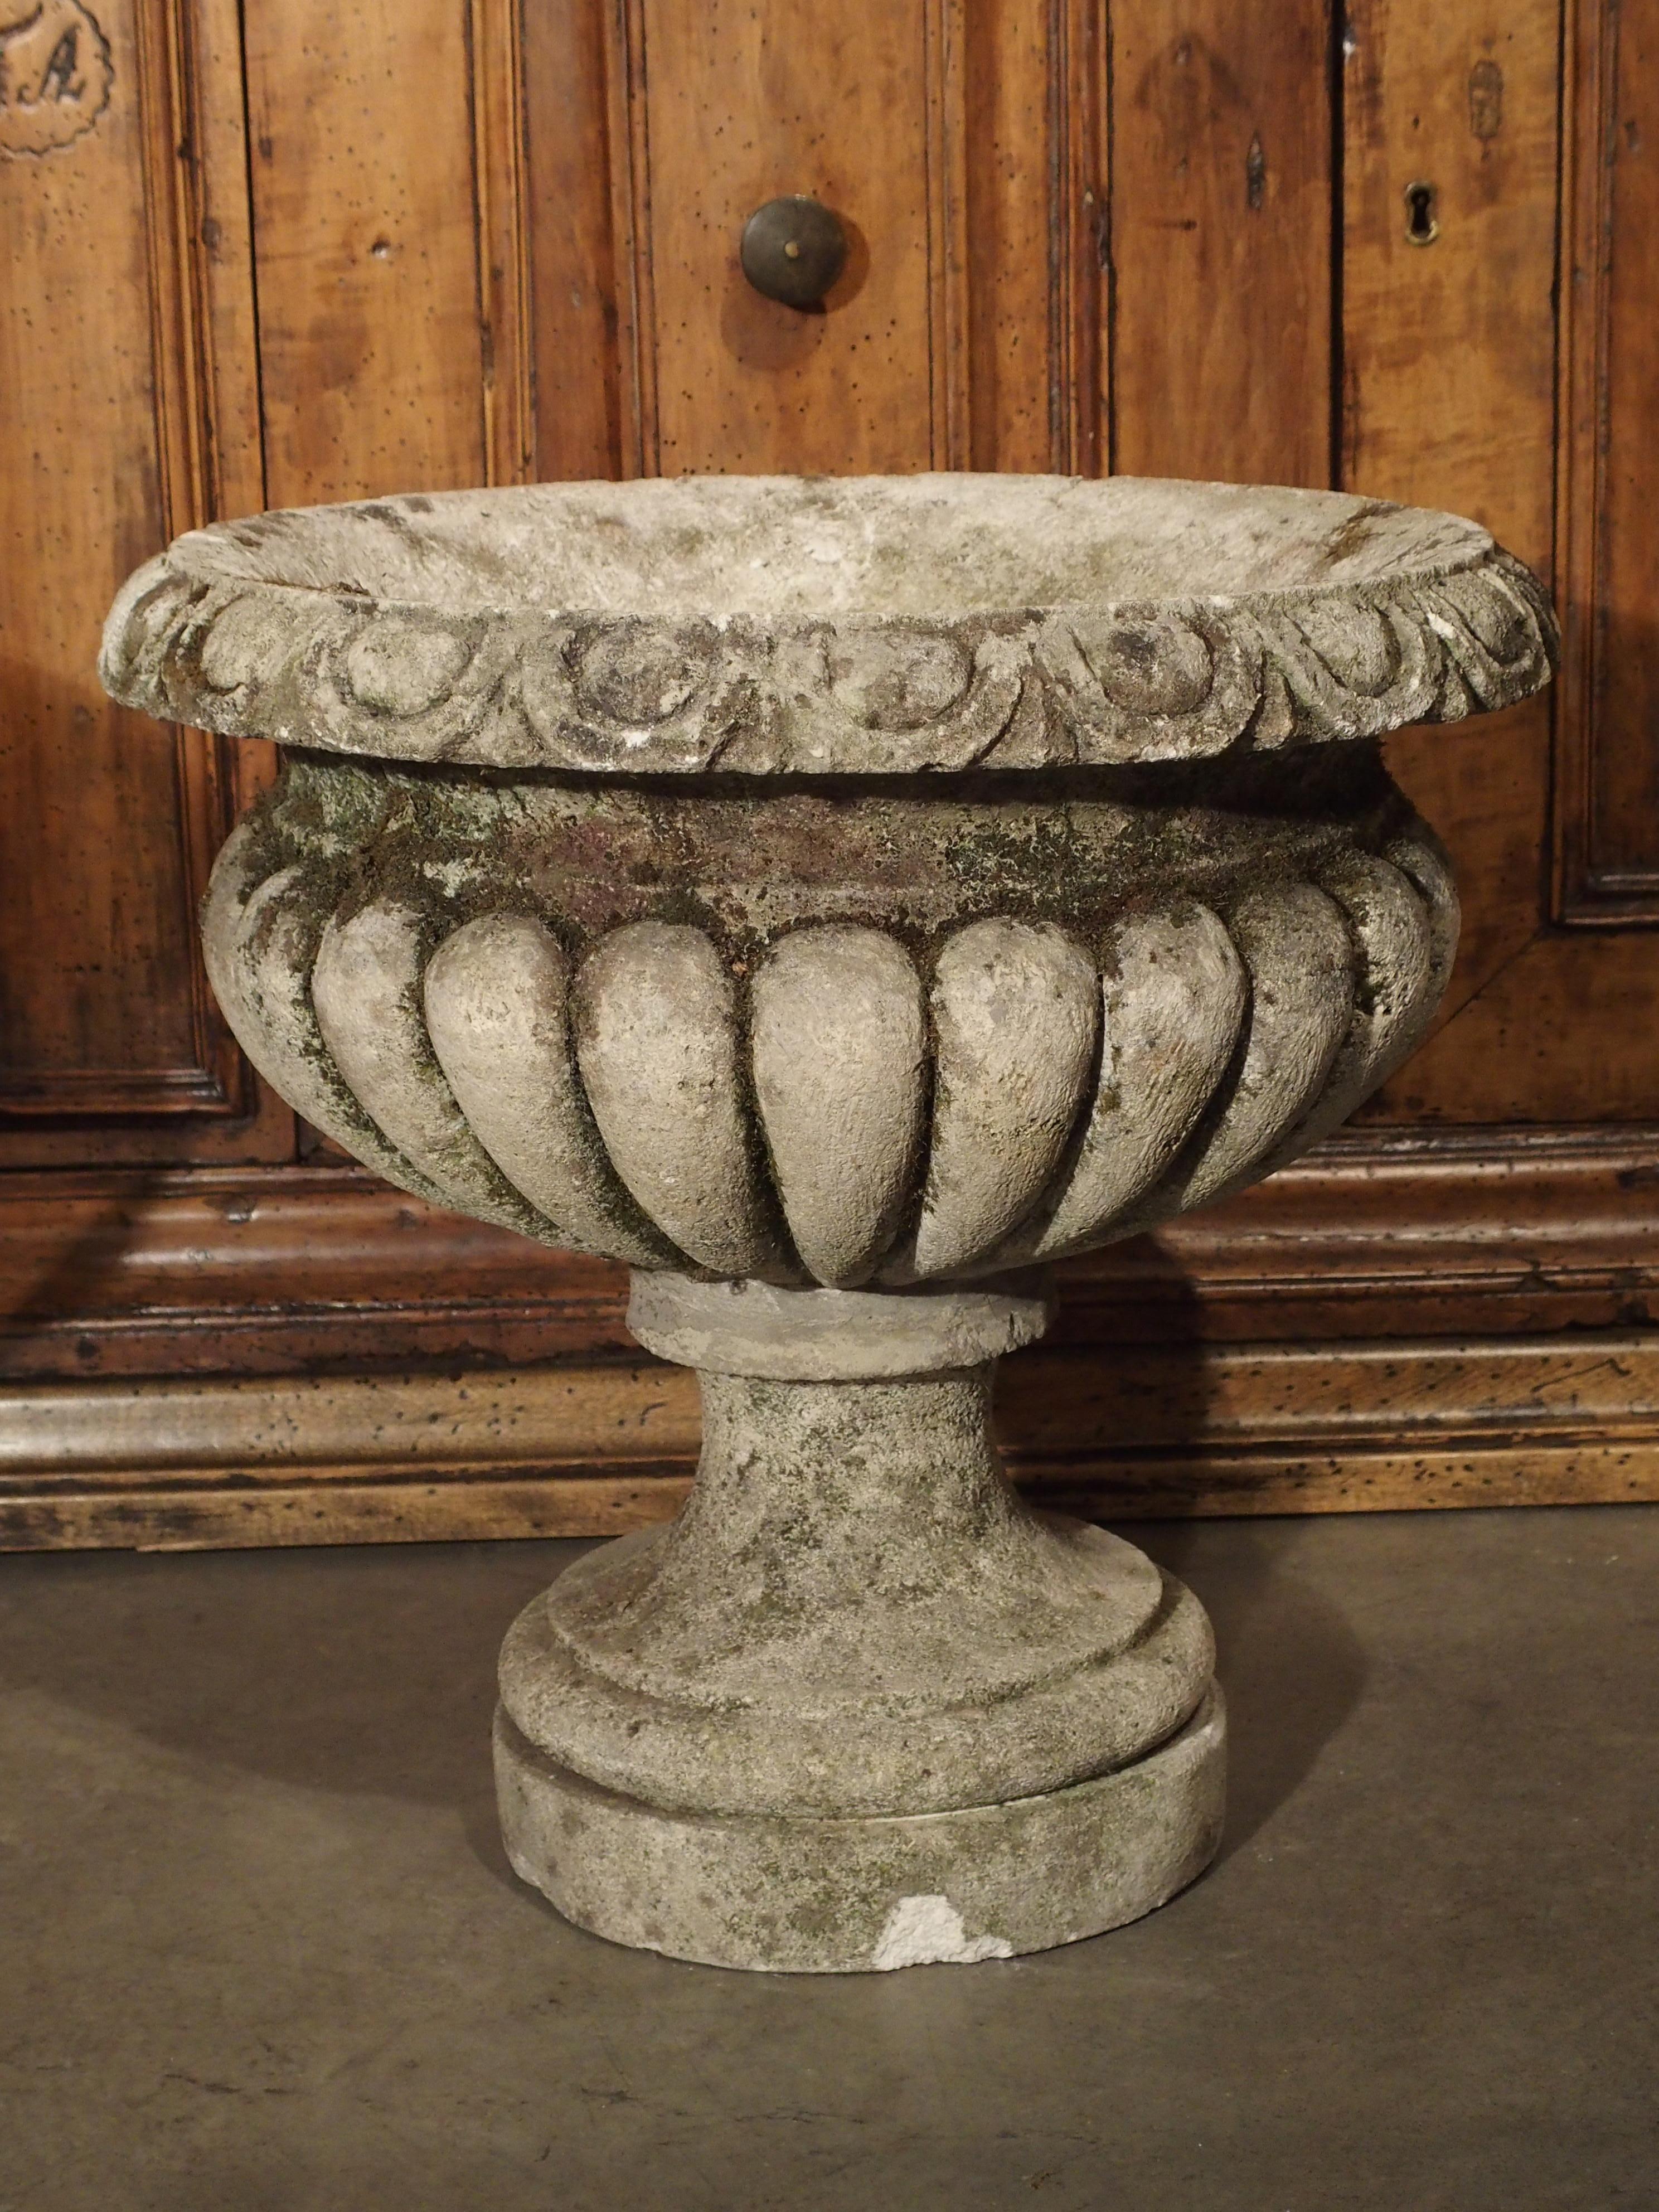 Limestone Carved Vicenza Stone Vases from Italy, circa 1900